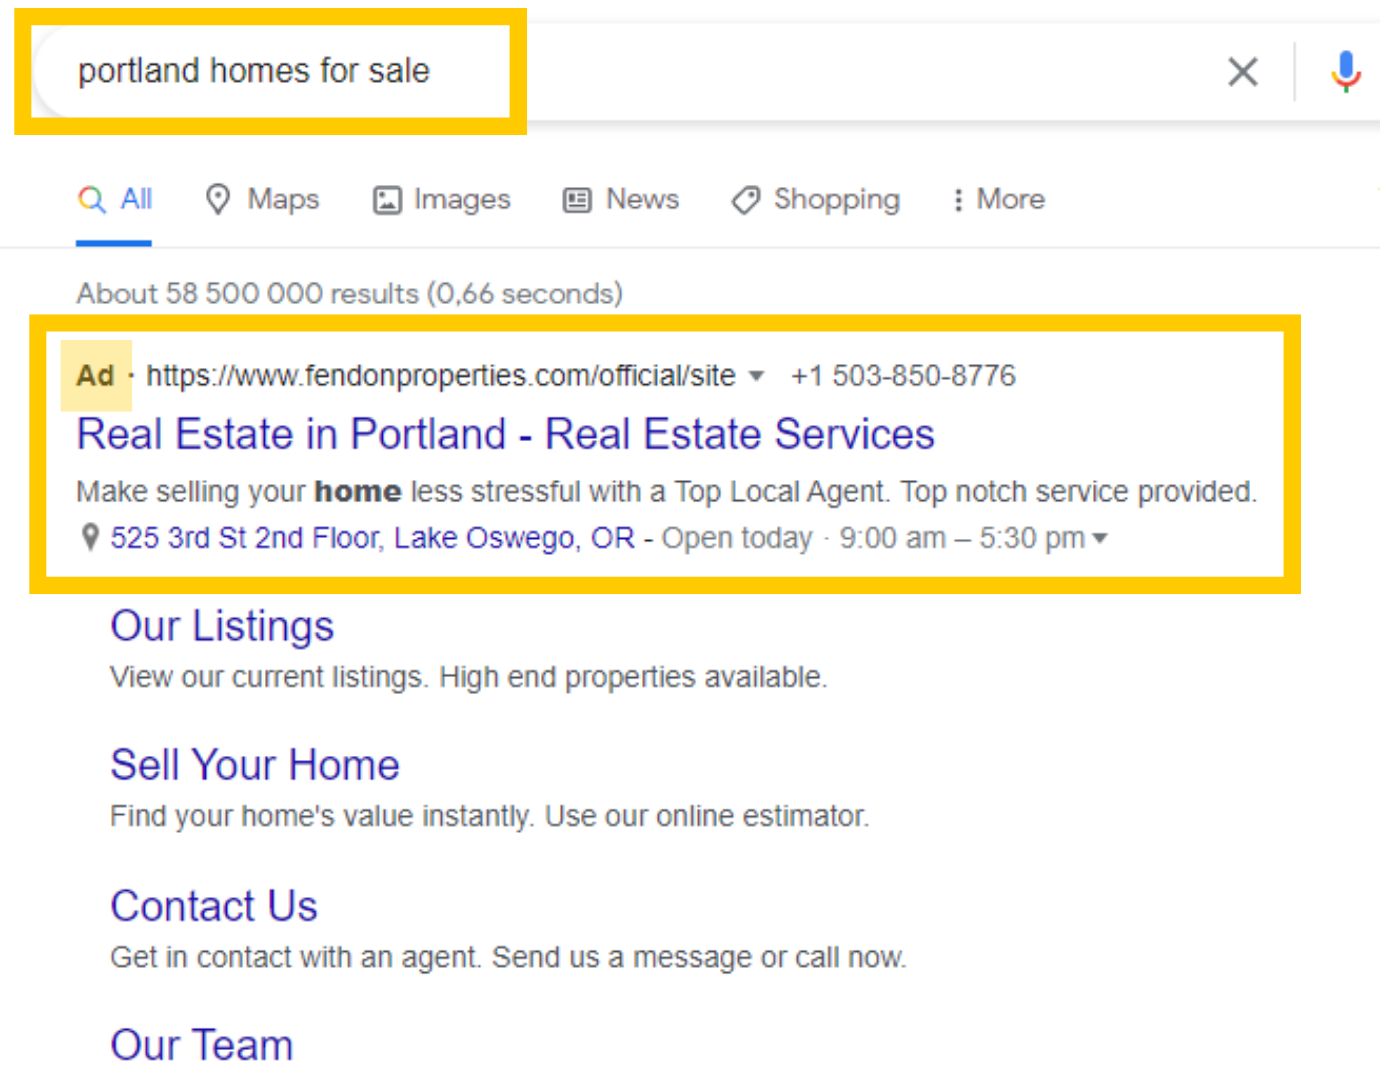 Screenshot of Google Search results for the keyword "Portland Homes For Sale"